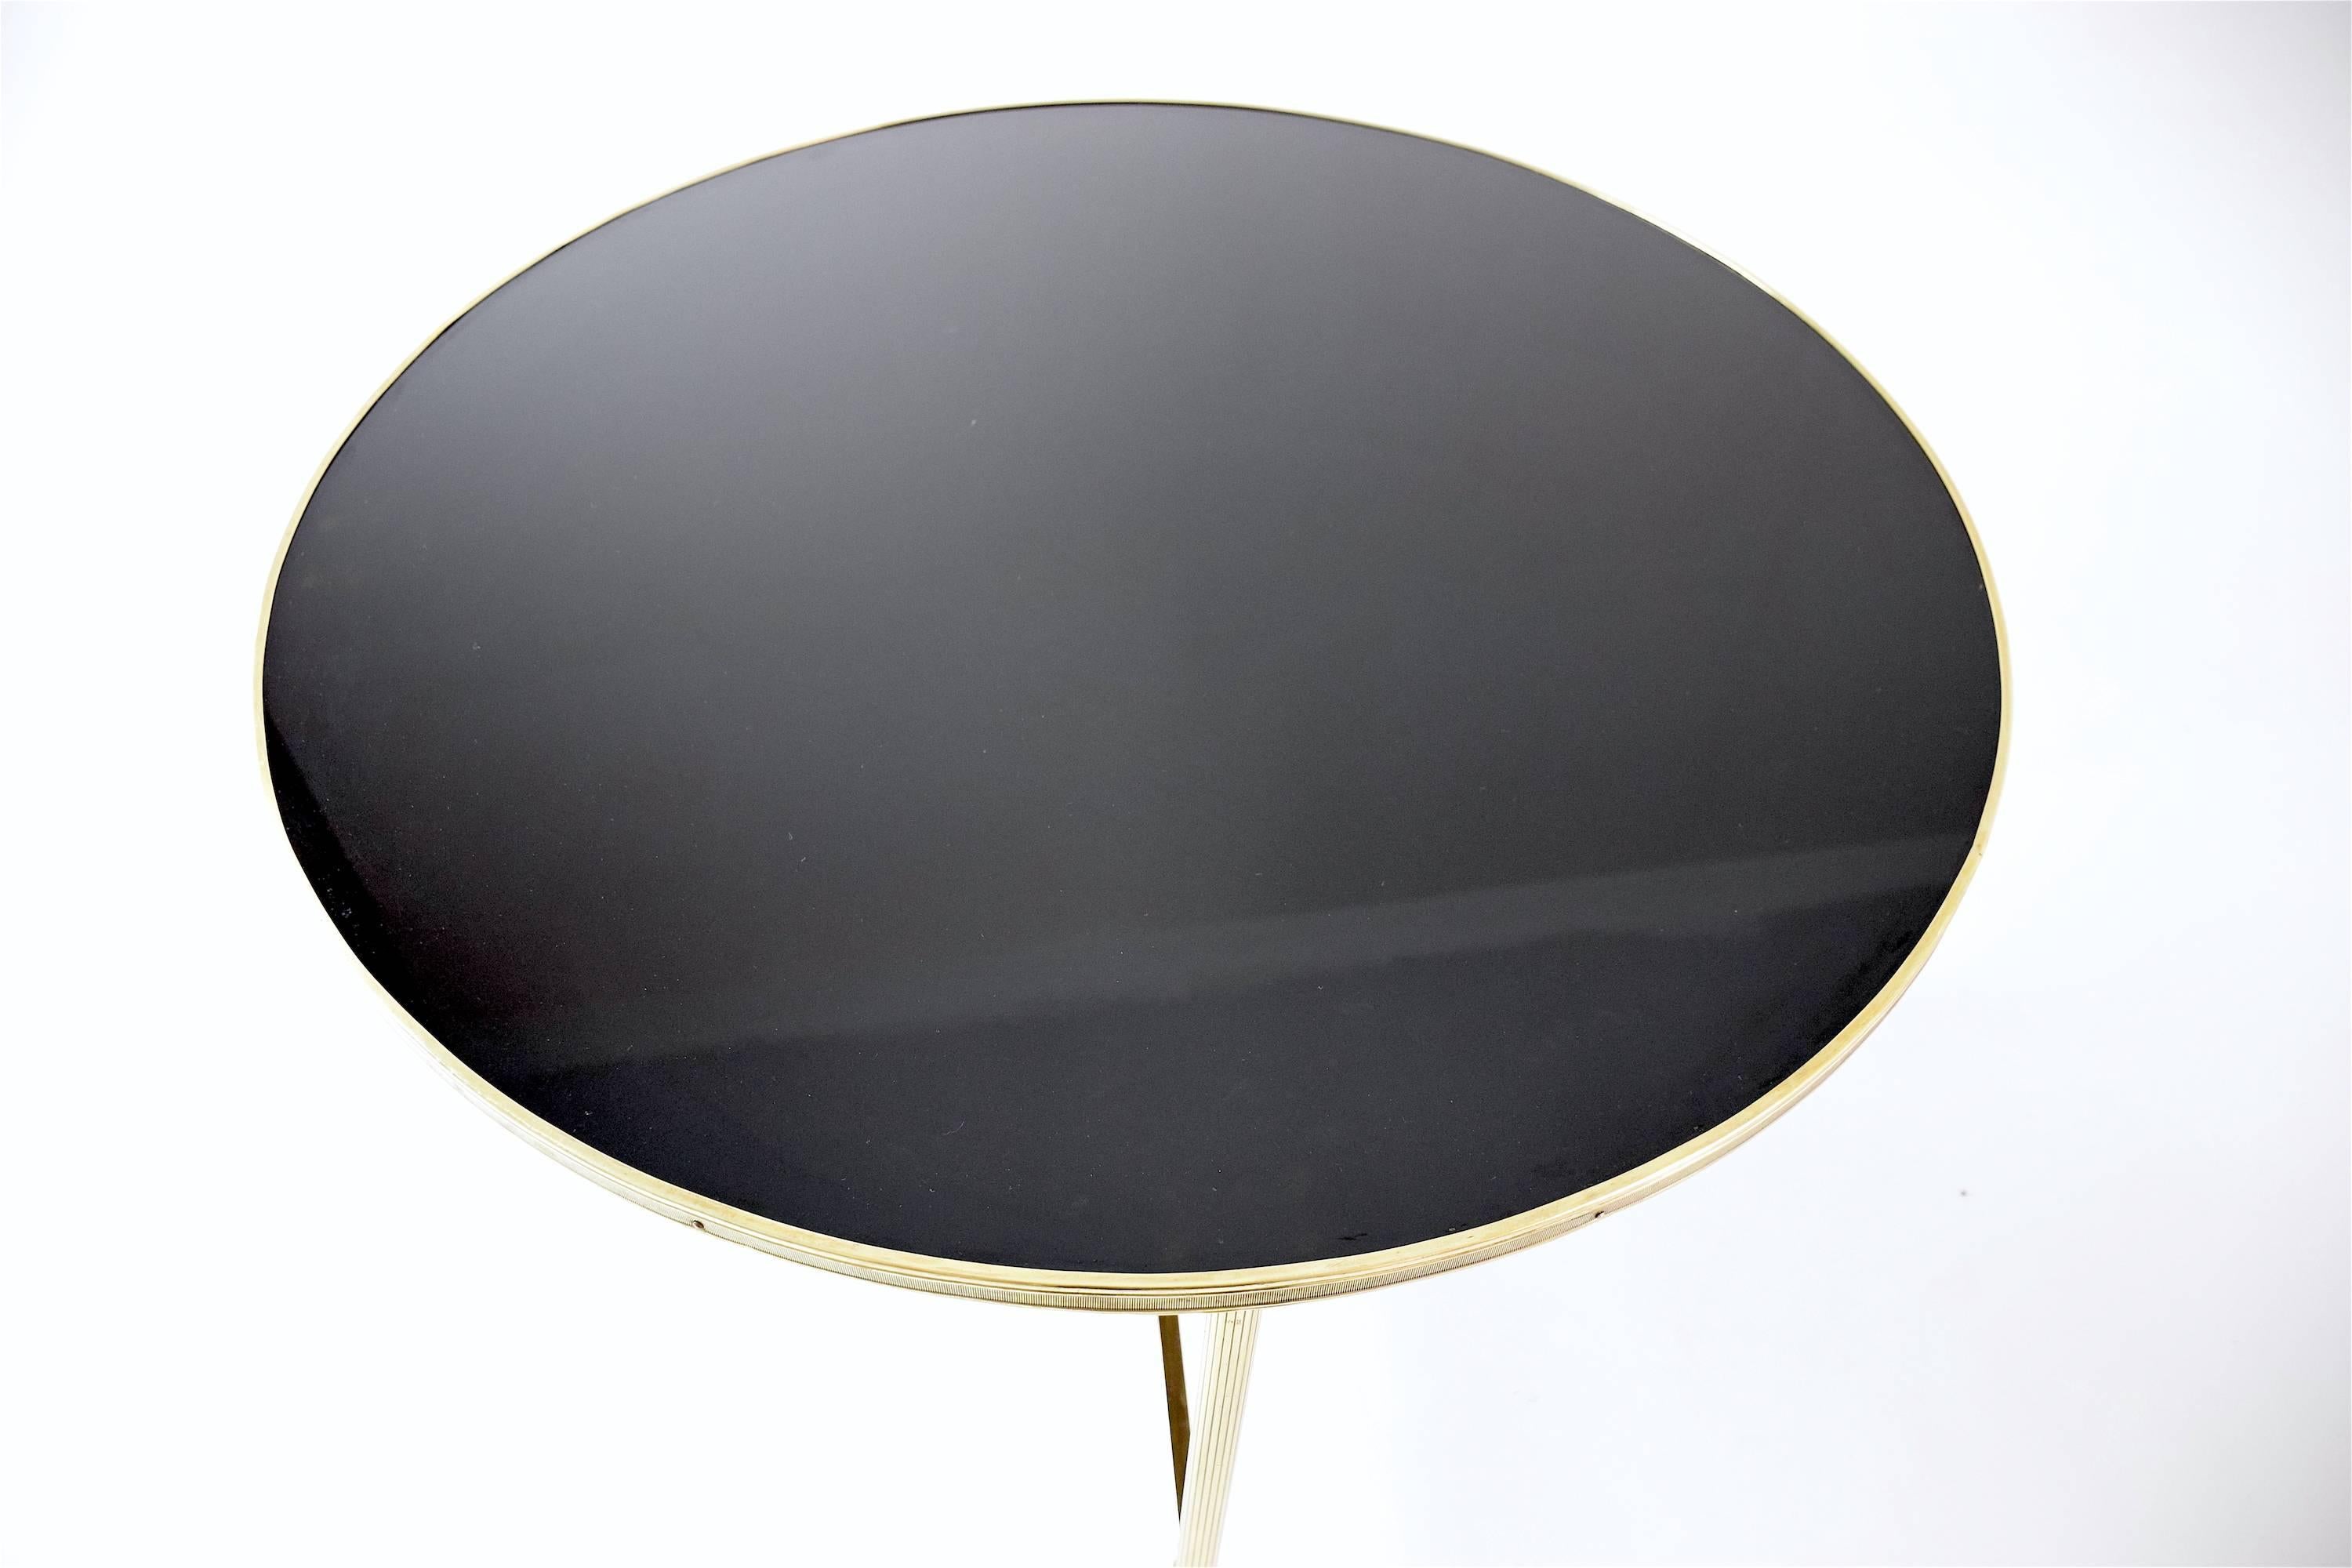 20th Century French Brass Midcentury Coffee Table Attributed to Maison Jansen, 1970s